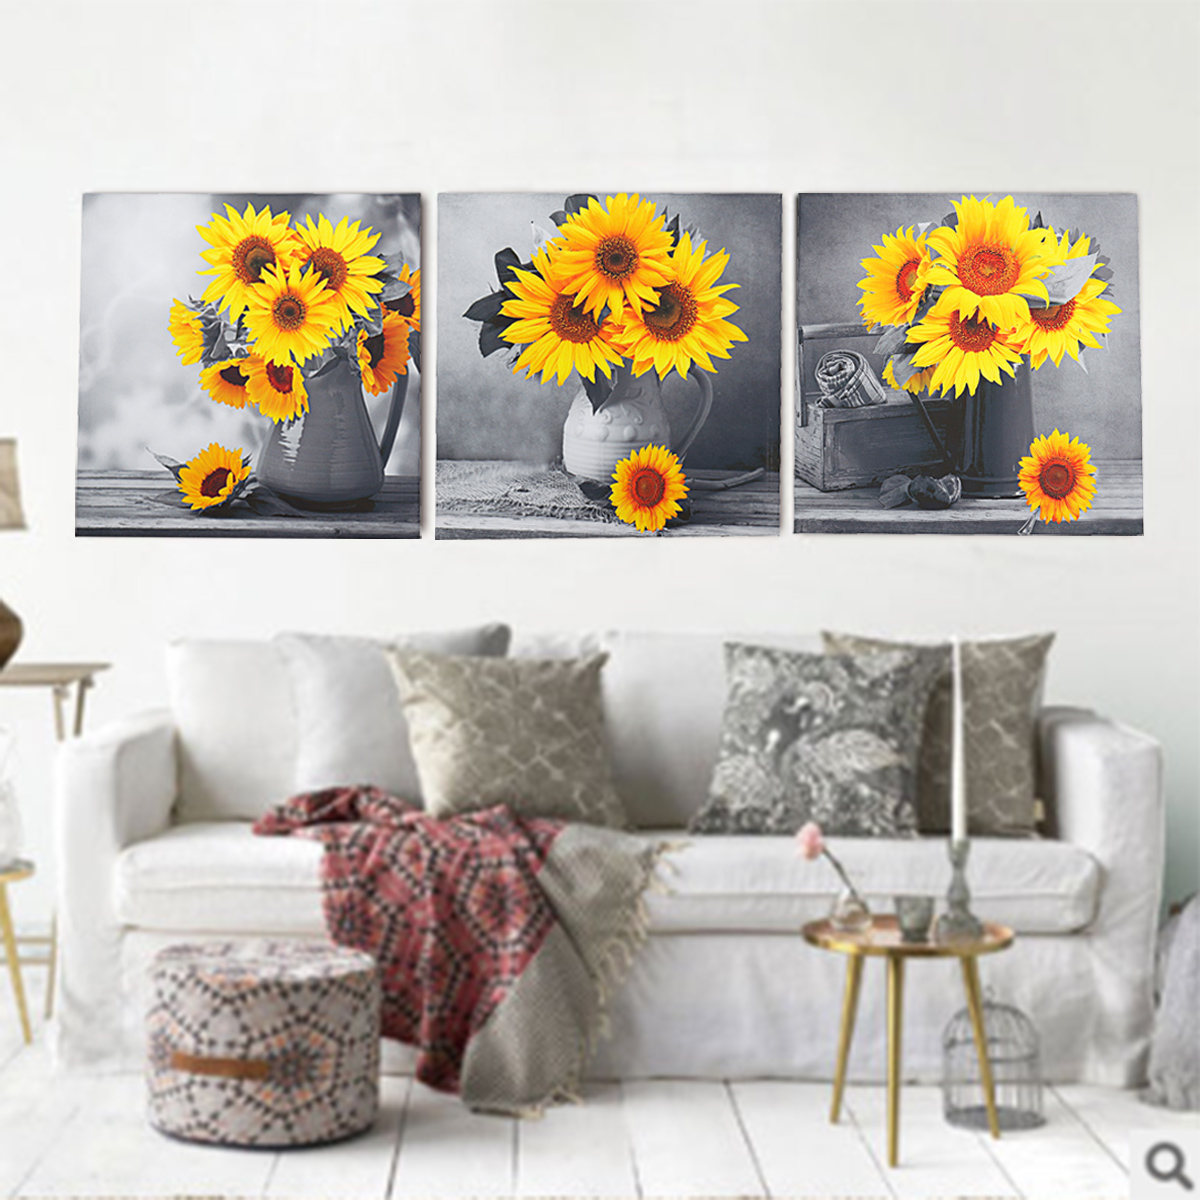 30303-cm-Sunflower-Wall-Art-Painting-Living-Room-Bedroom-Hanging-Canvas-Pictures-Office-Mural-Decora-1791798-9